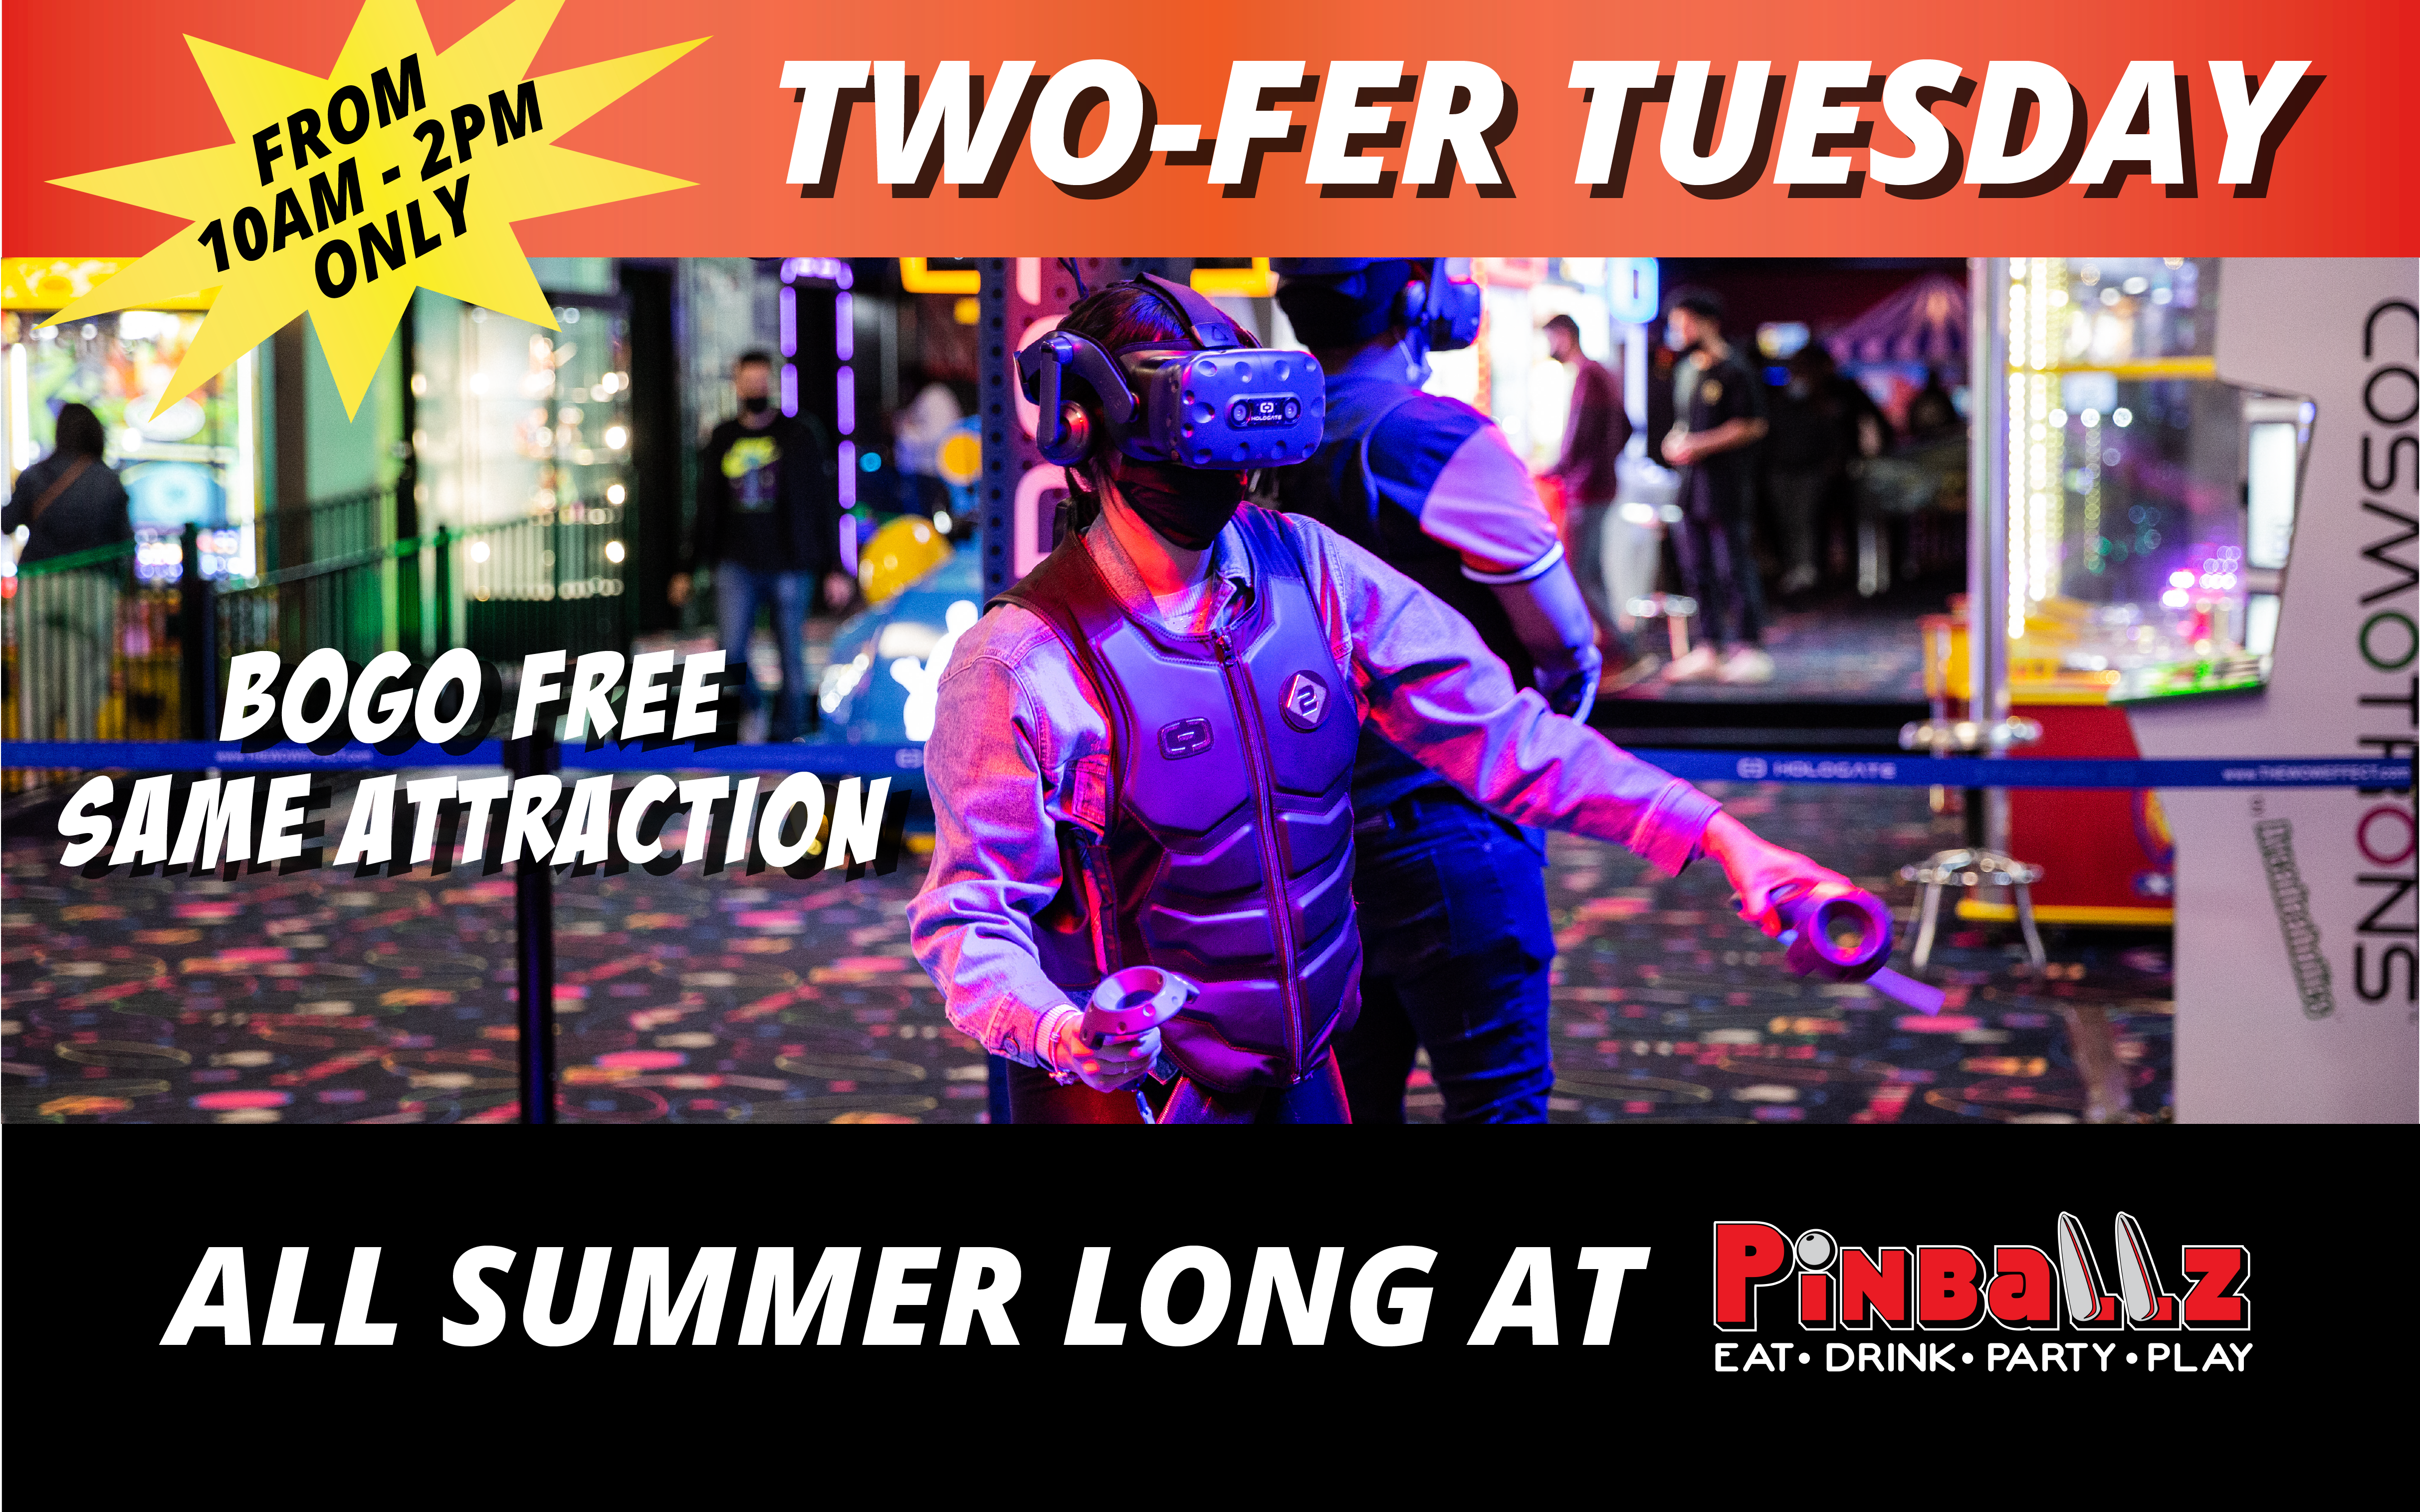 Two-Fer Tuesday, Buy one attraction get one FREE every Tuesday from 10am-2pm.